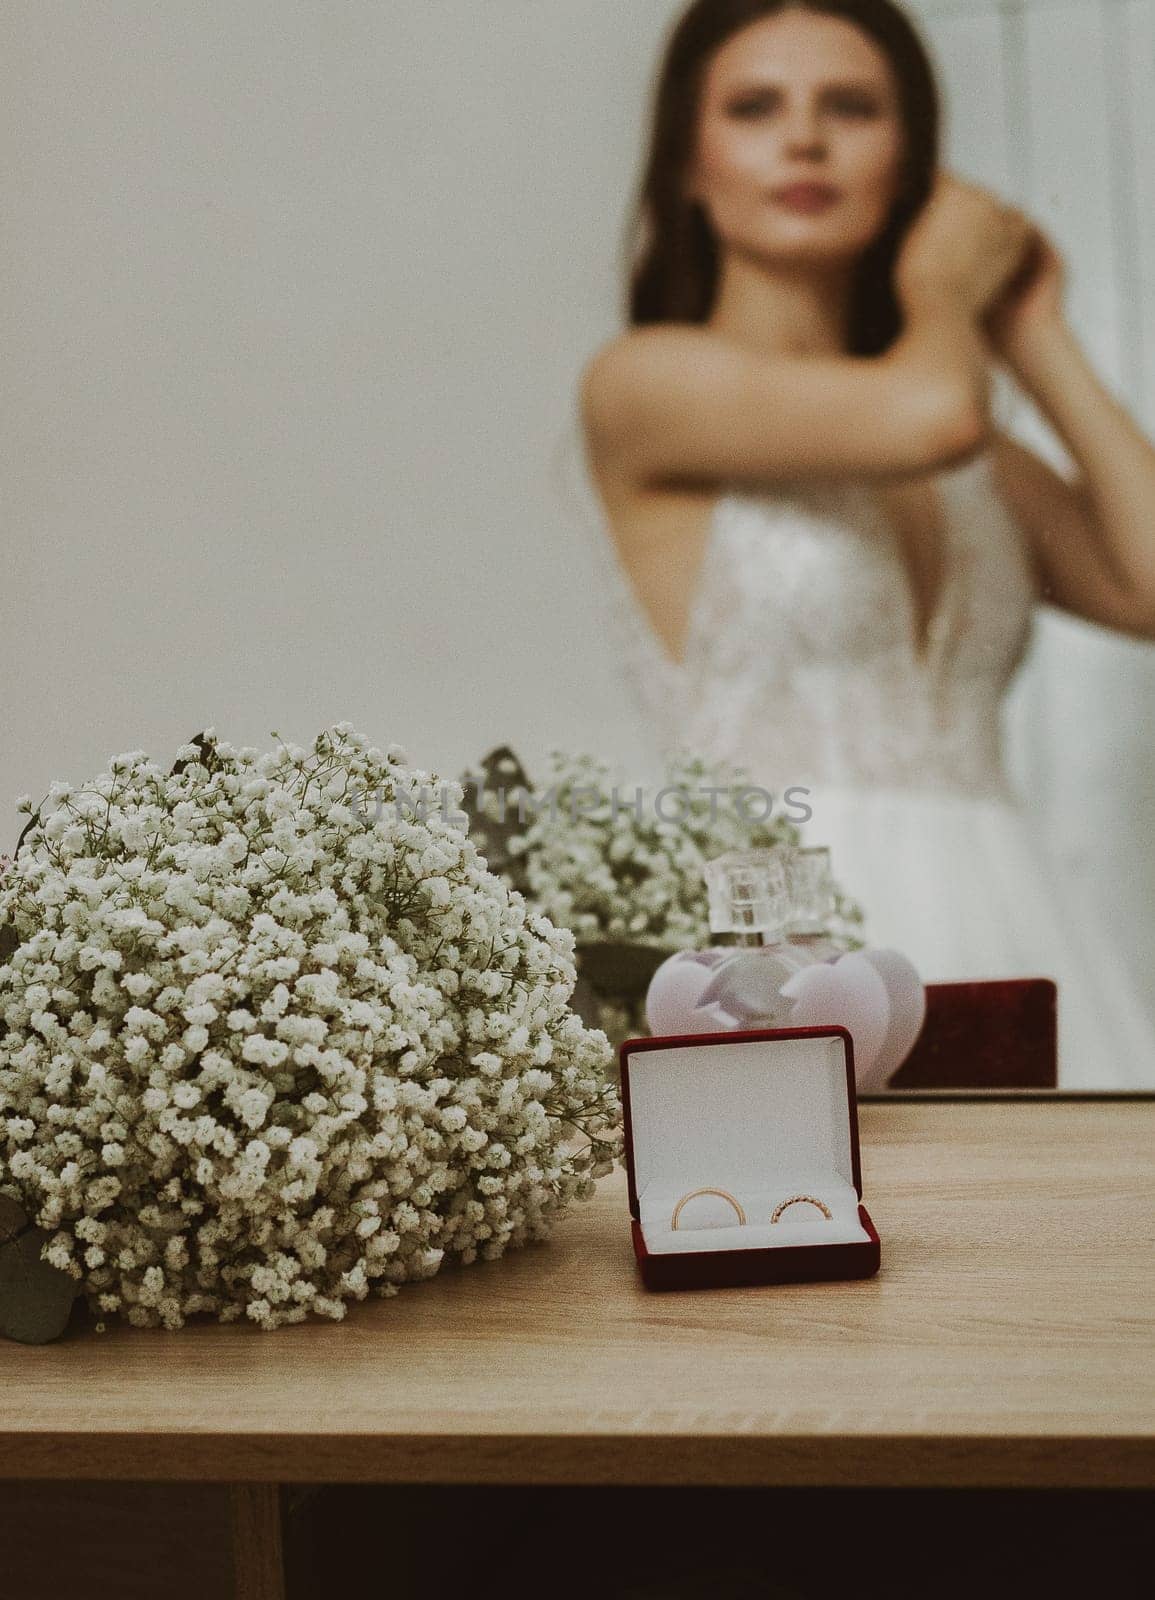 One wedding bouquet of boutonnieres and wedding rings in a box lying on a table with a blurred reflection of the bride in a mirror, side view close-up.